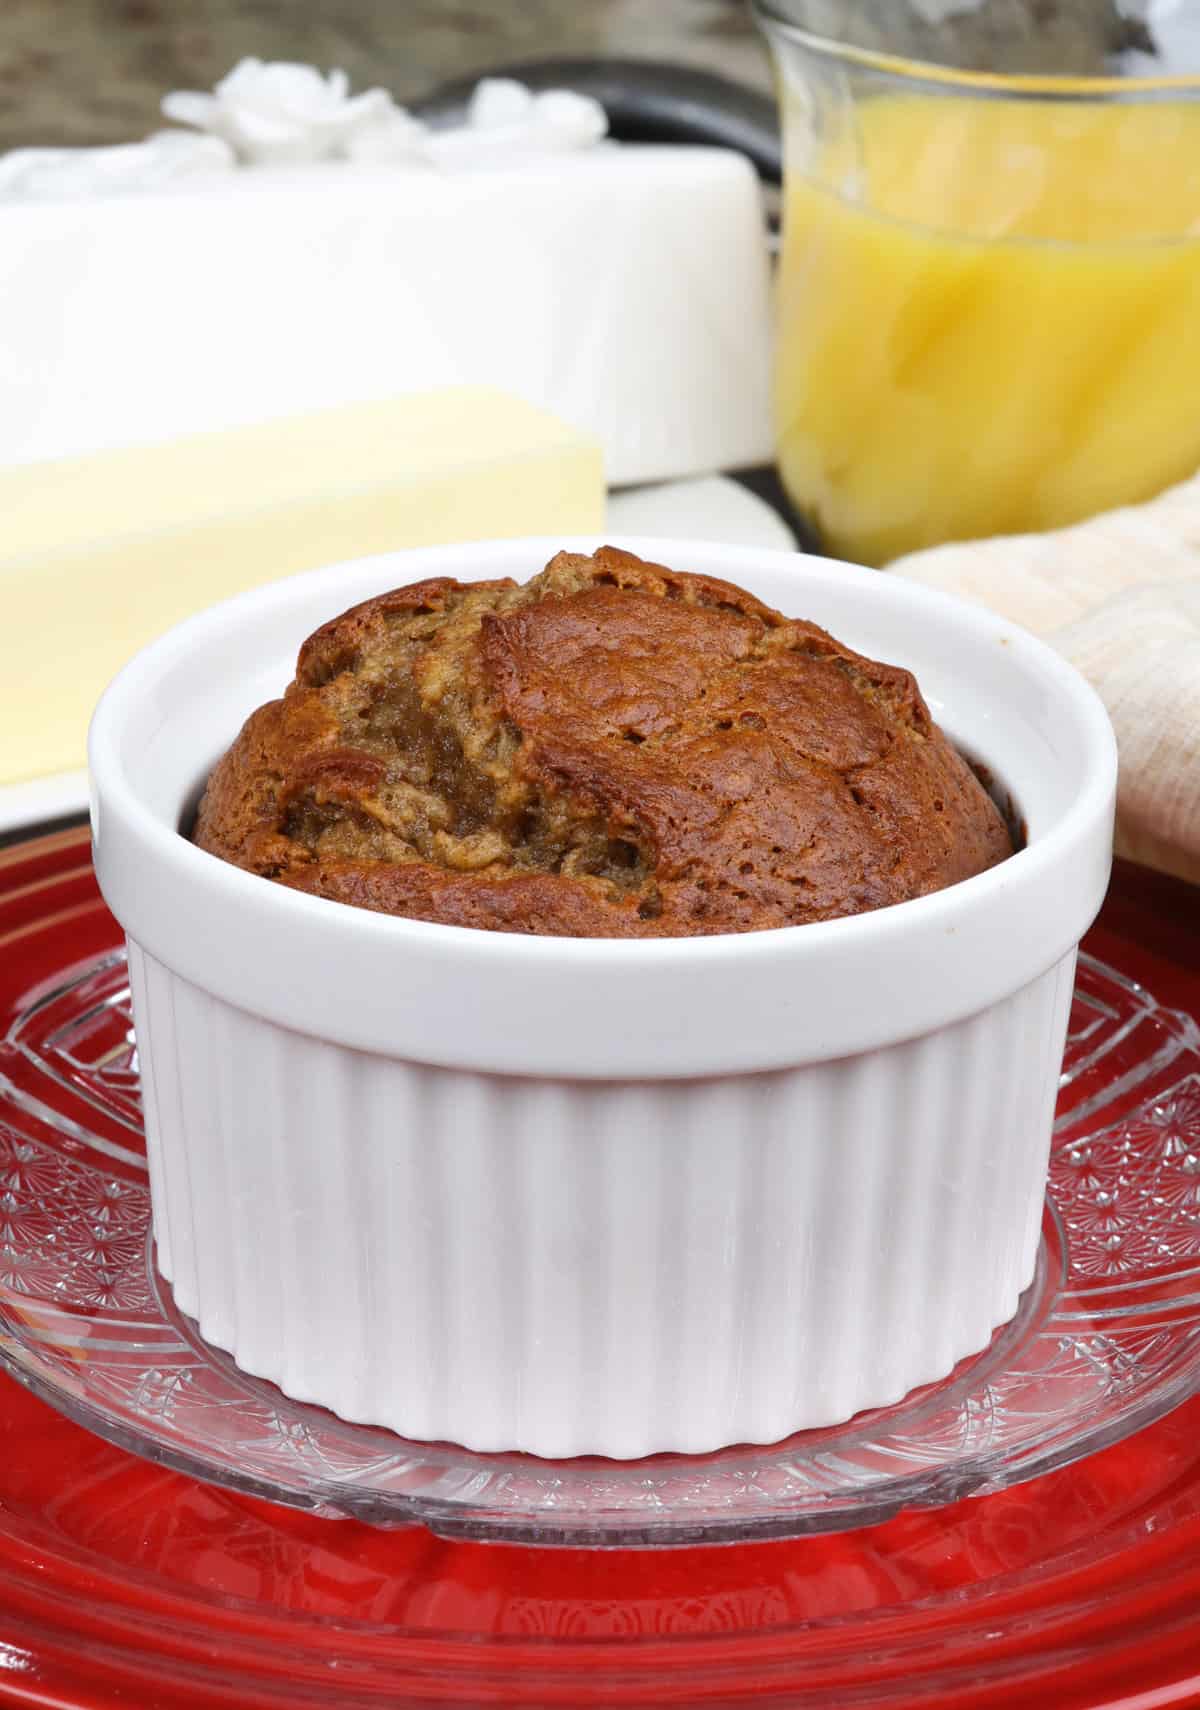 a small banana nut bread baked in a ramekin on a red plate next to a plate of butter and a glass of orange juice.